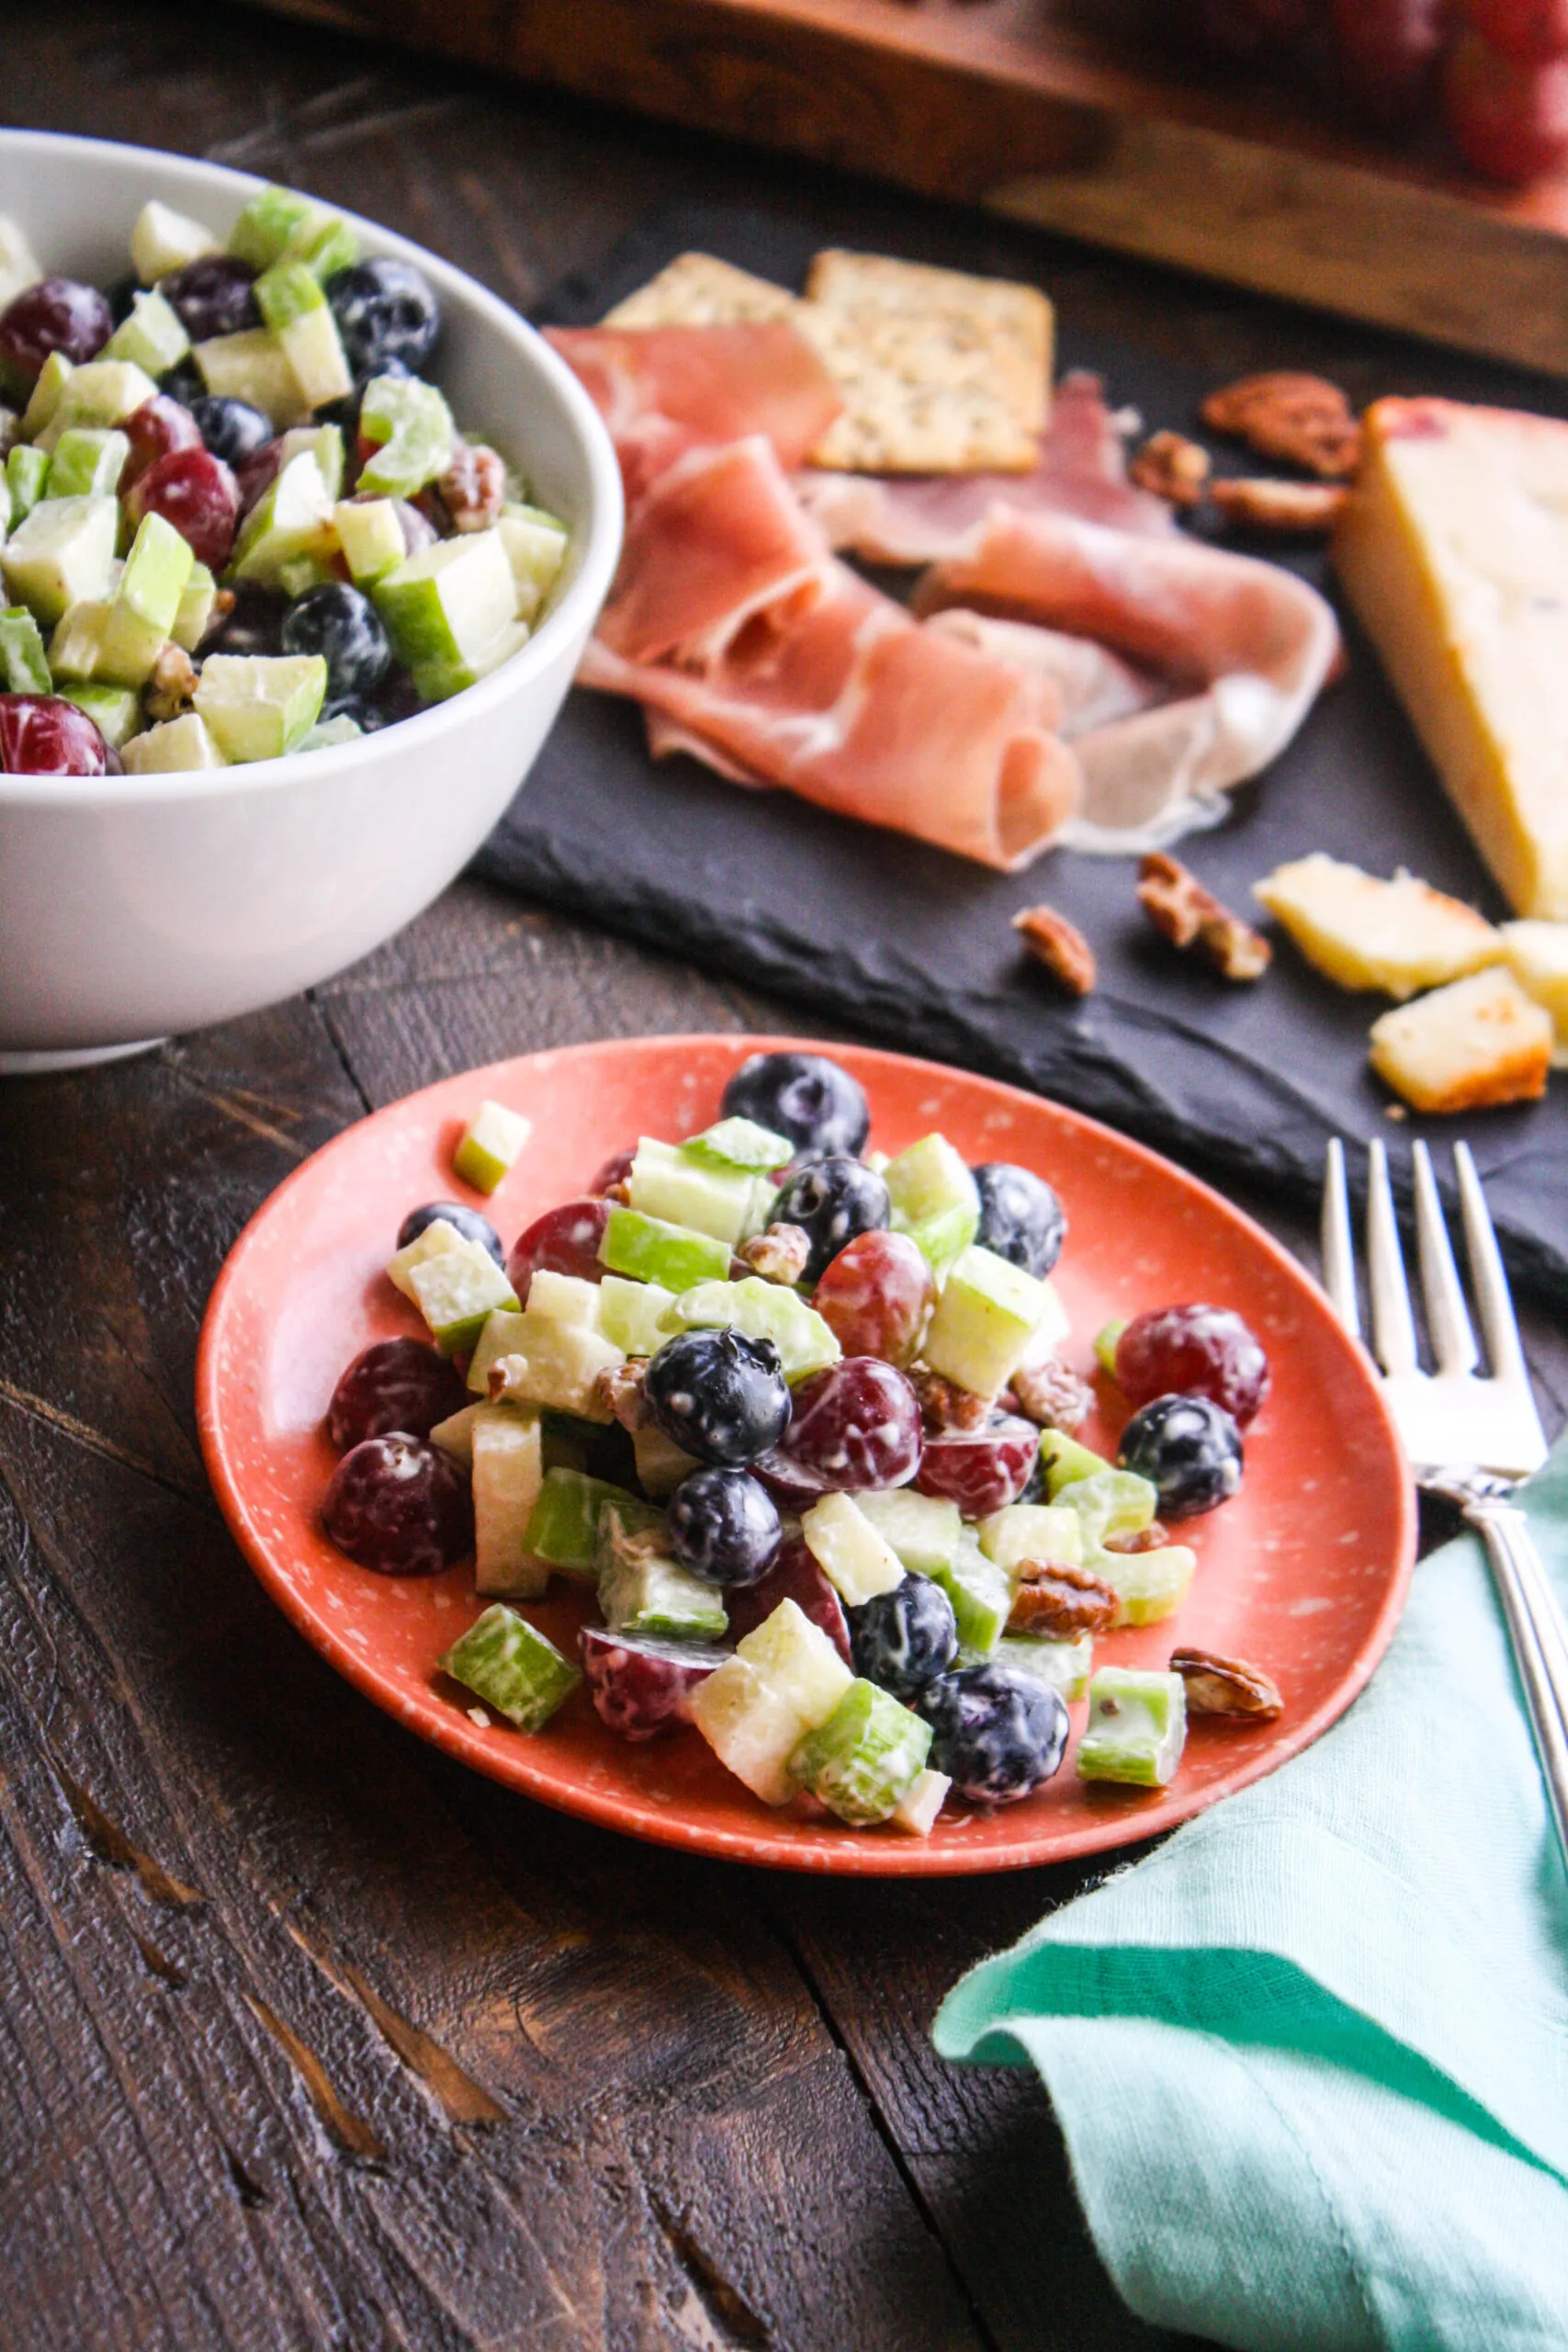 Enjoy Waldorf salad as part of a lighter meal or for a special get together.